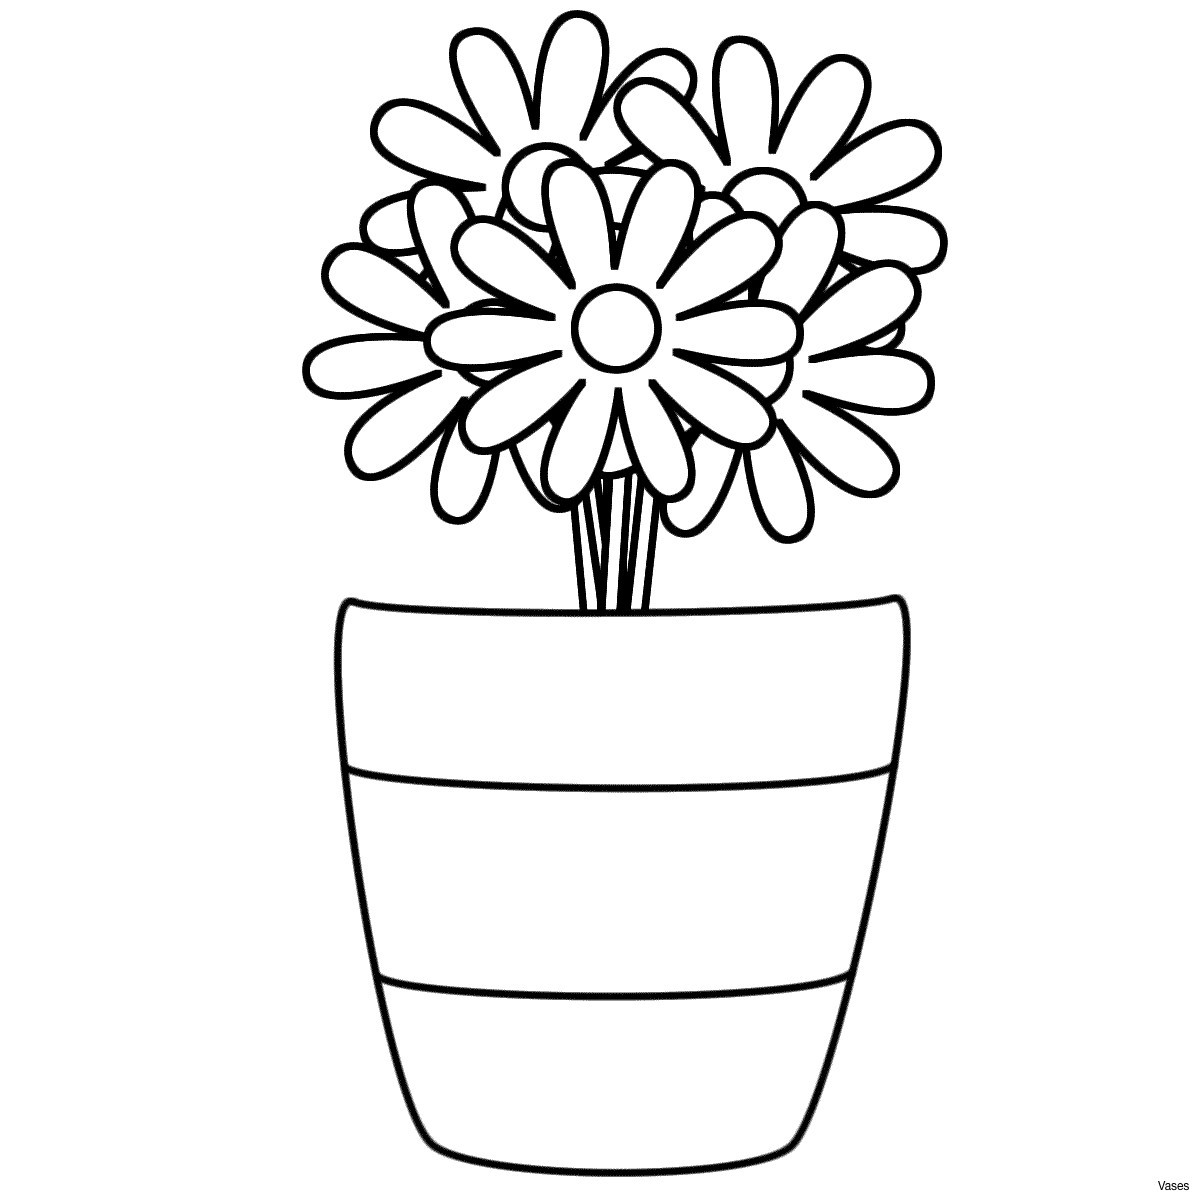 17 Trendy 4ft Glass Vase 2024 free download 4ft glass vase of care bears coloring pages best of vases flower vase coloring page pertaining to care bears coloring pages best of vases flower vase coloring page pages flowers in a top